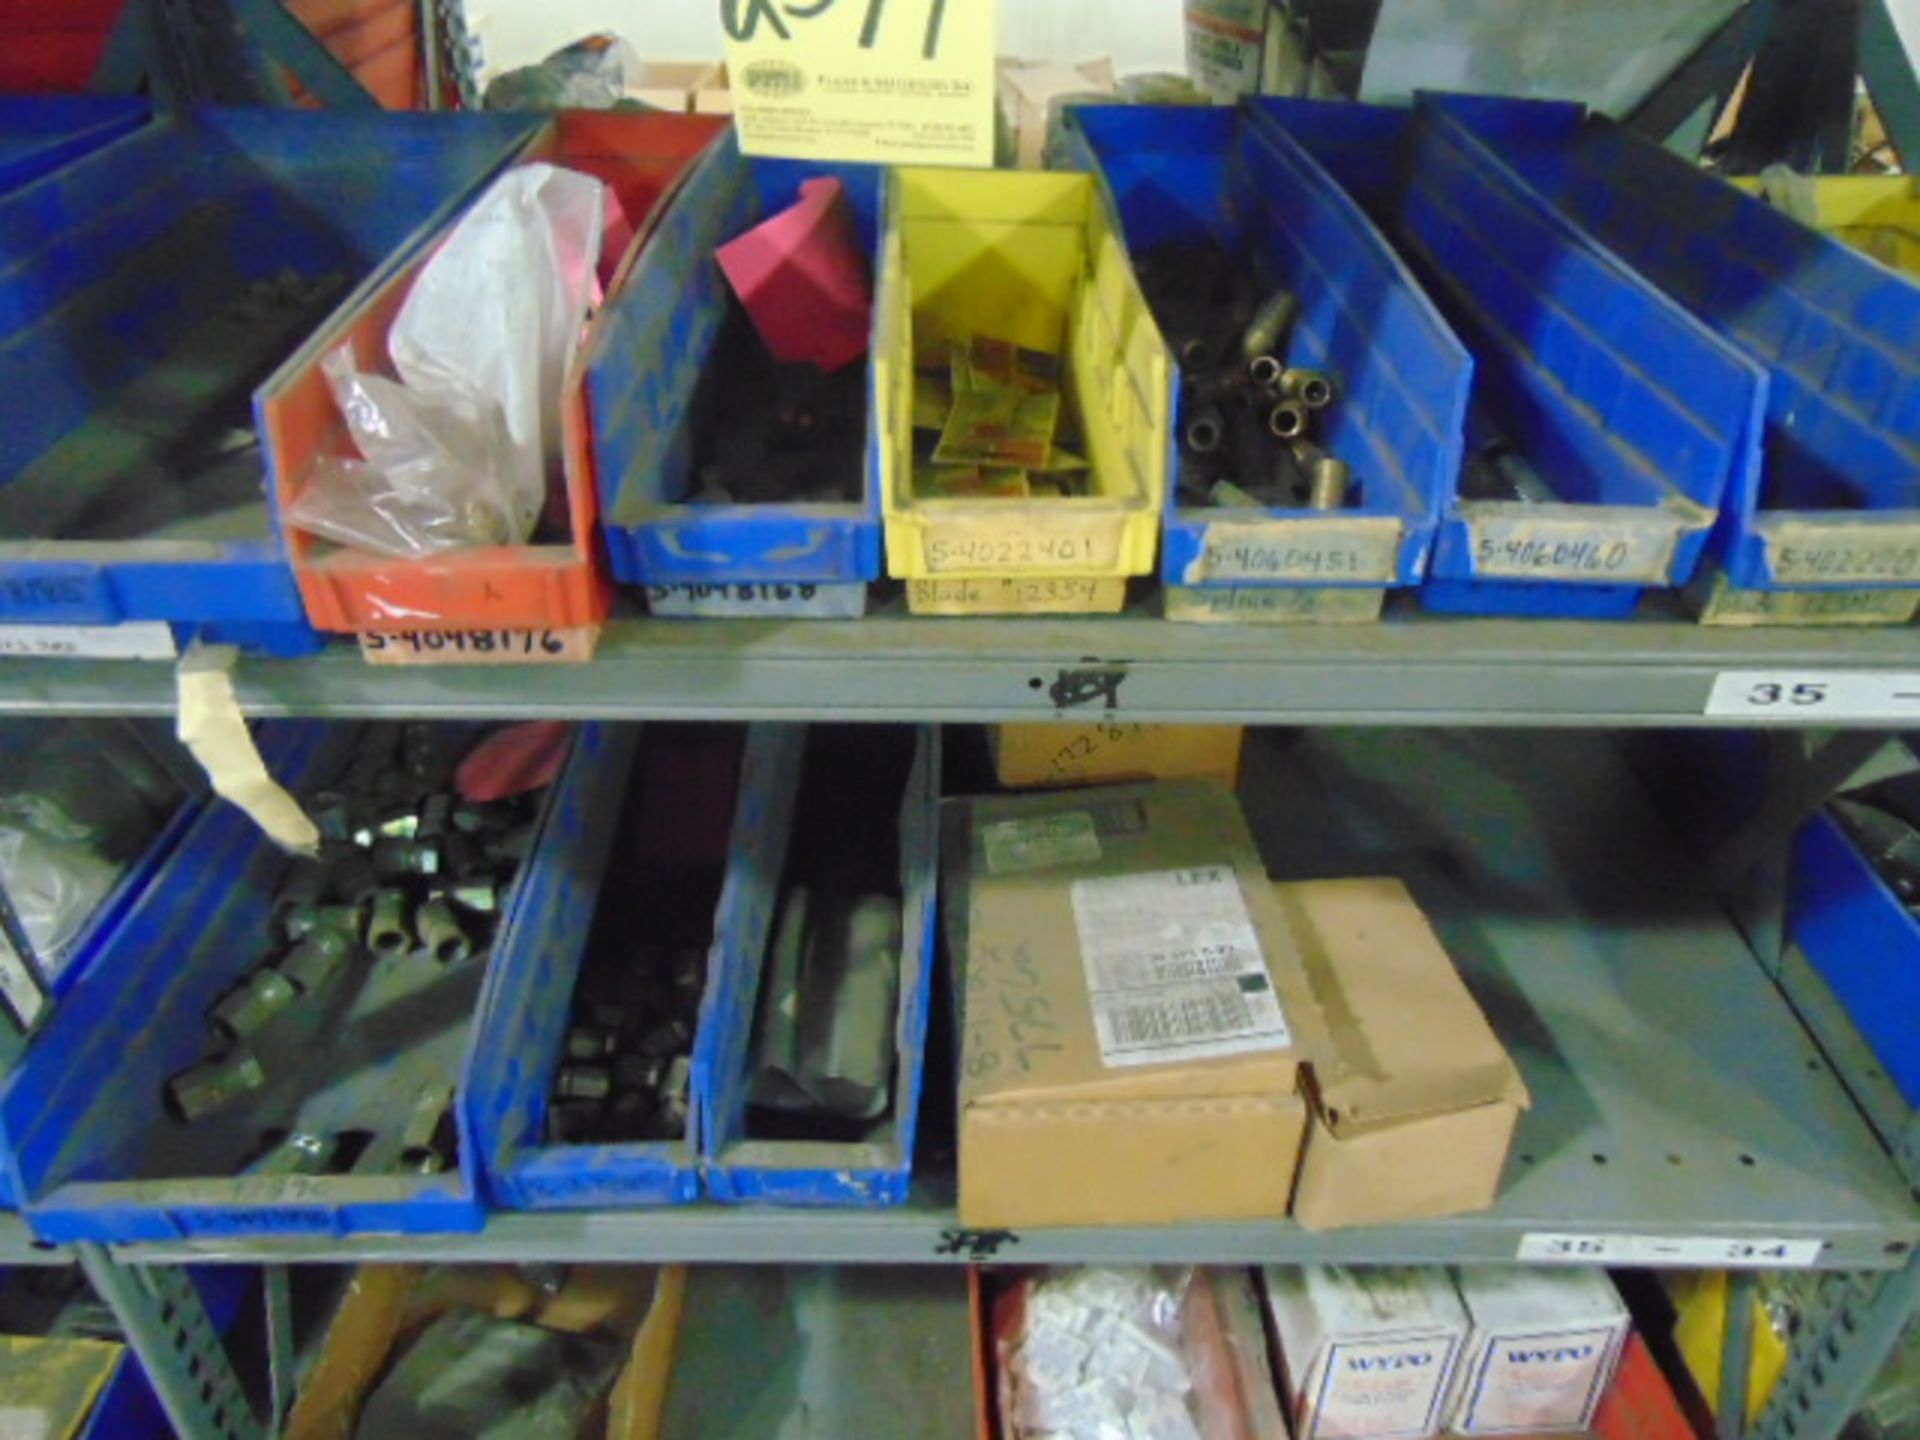 LOT CONSISTING OF: hardware & misc., assorted (in two sections of shelving) - Image 5 of 5